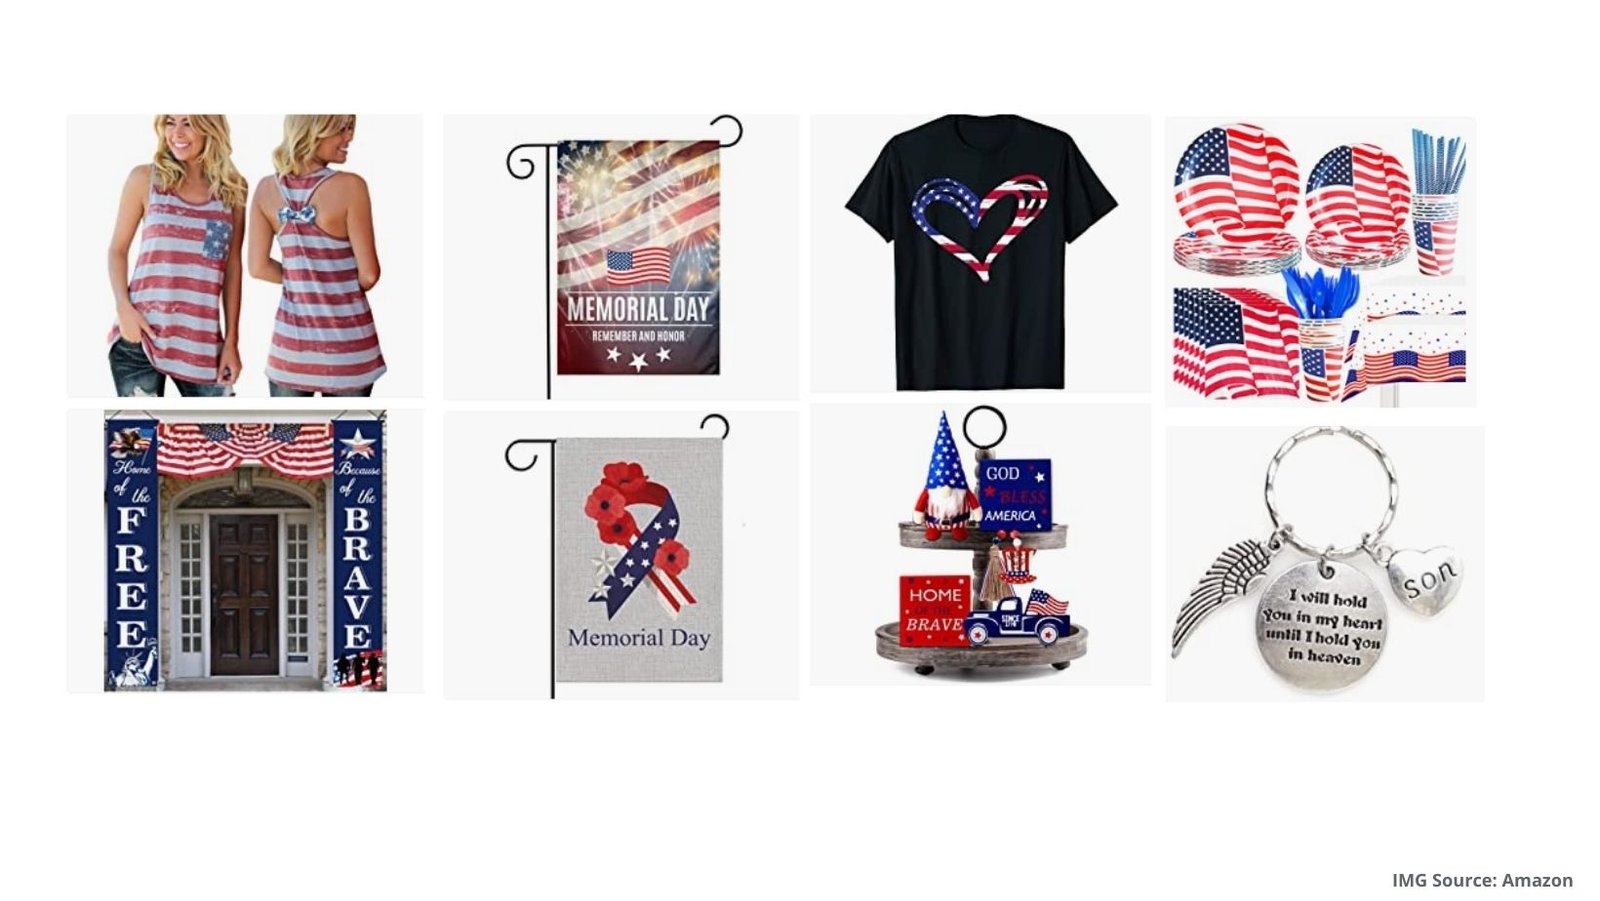 sample Amazon products for Memorial Day